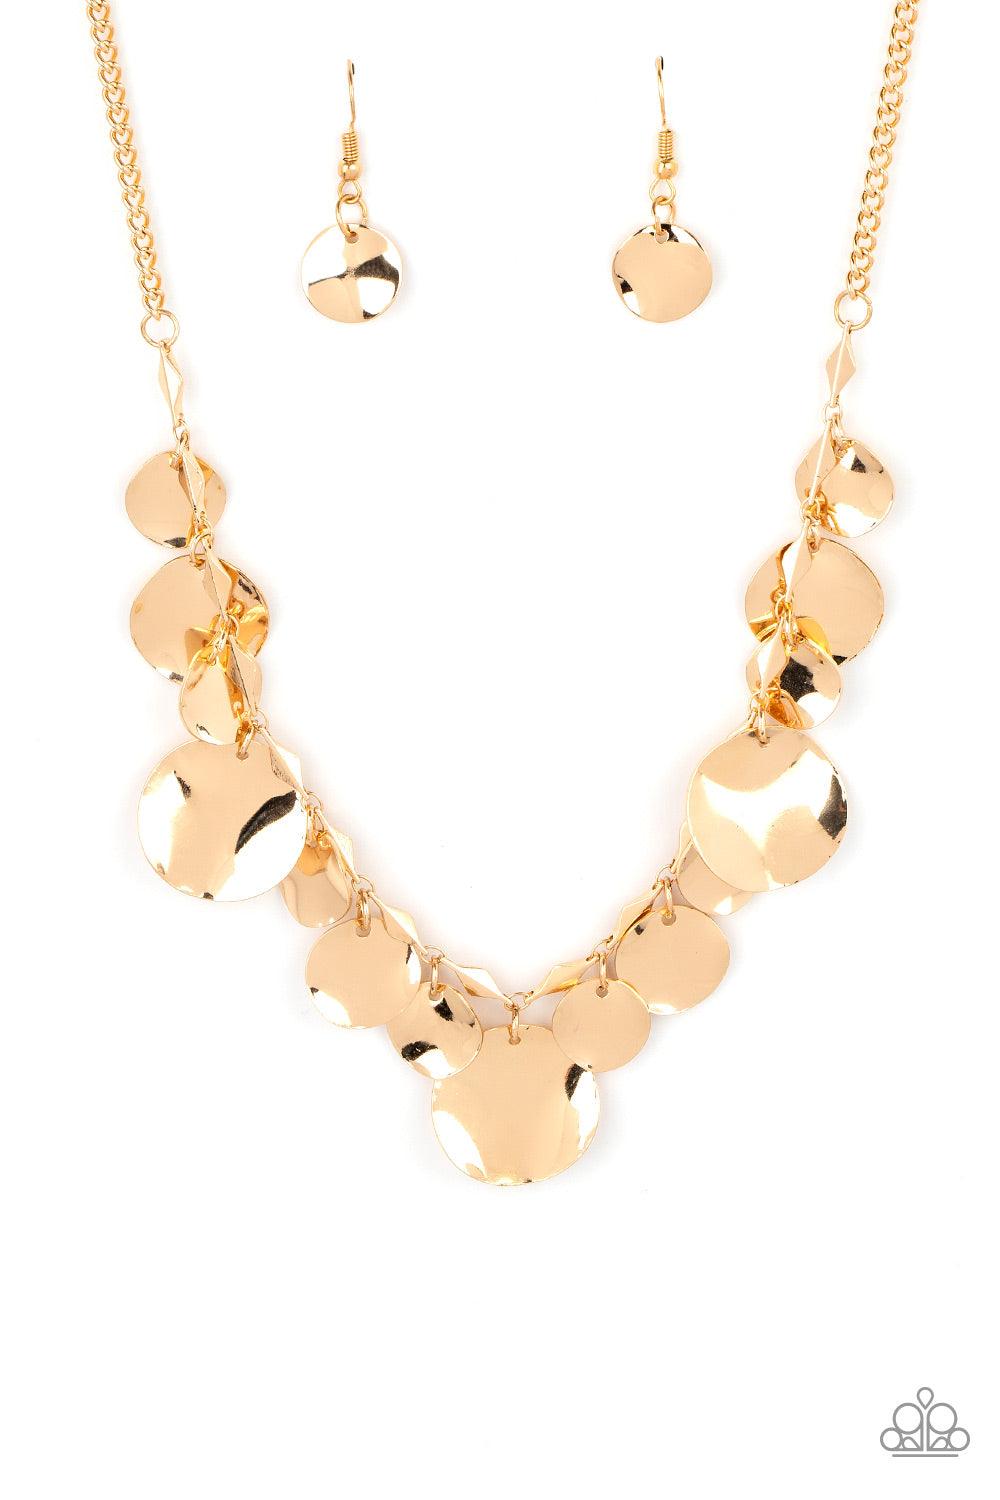 Paparazzi Accessories GLISTEN Closely - Gold Featuring diamond shaped gold fittings, a mismatched collection of hammered gold discs swings from a classic shiny gold chain below the collar for an eye-catching finish. Features an adjustable clasp closure. S